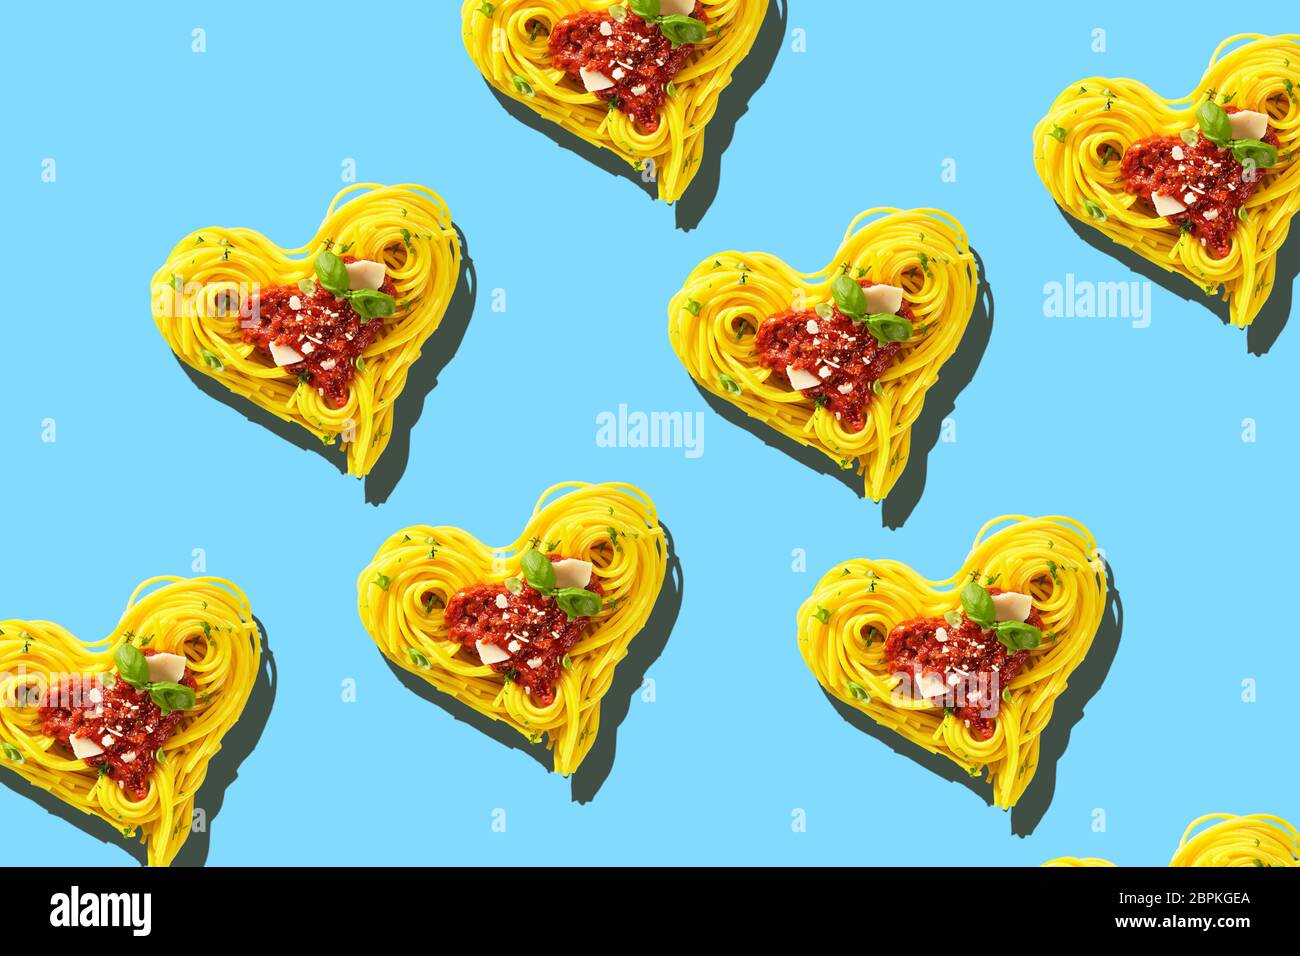 Decorative hearts of pasta of cooked yellow spaghetti with tomatoes, basil and parmesan cheese toping, viewed from above in full frame on light blue b Stock Photo